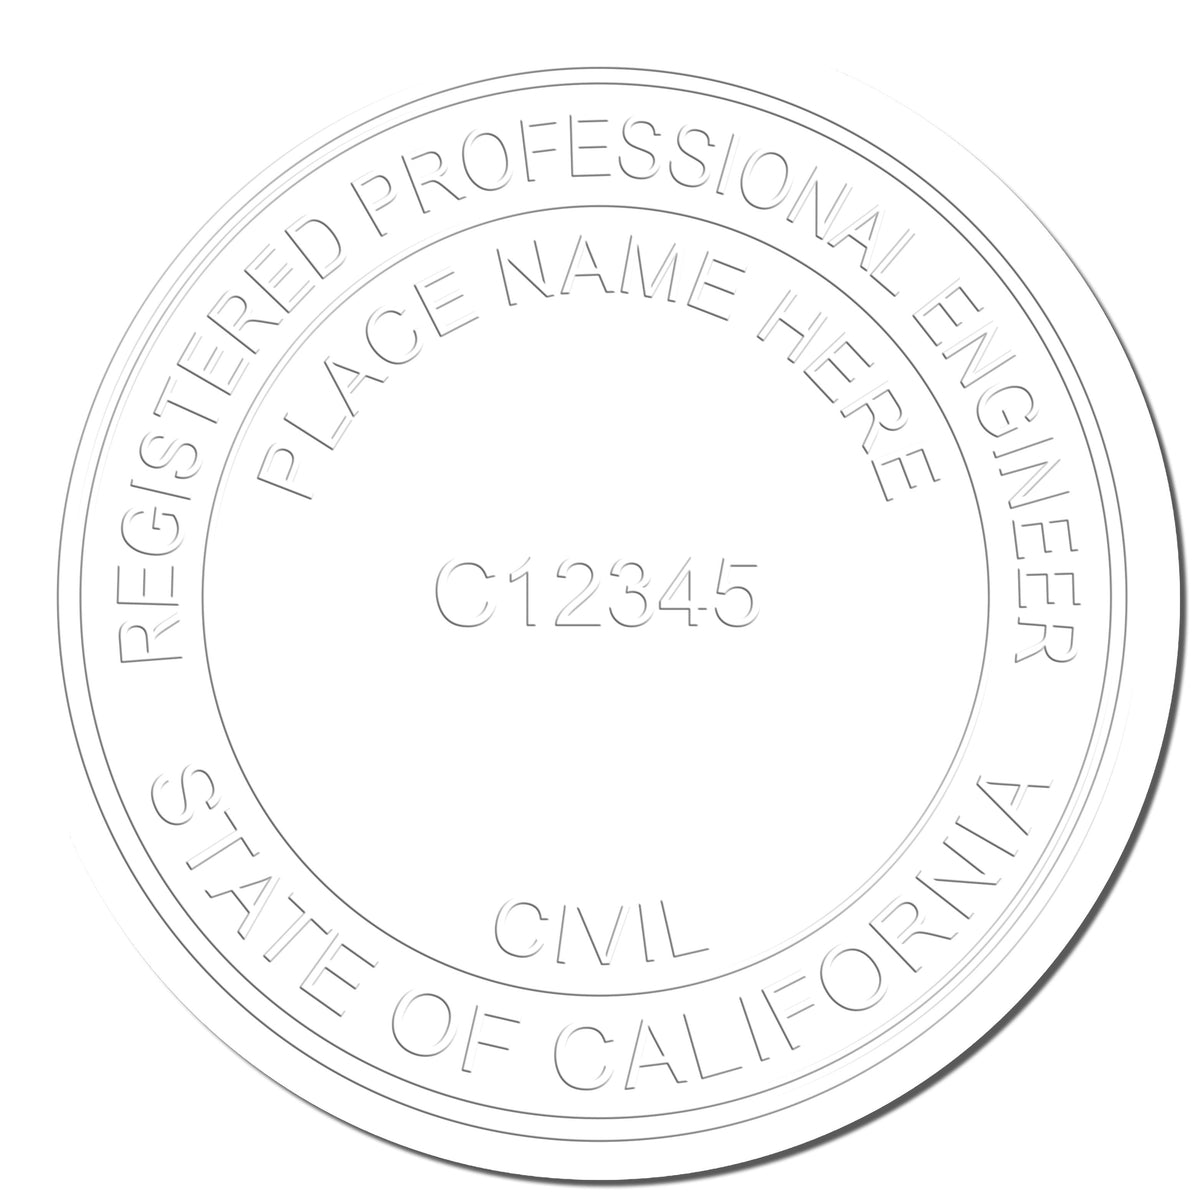 This paper is stamped with a sample imprint of the Hybrid California Engineer Seal, signifying its quality and reliability.